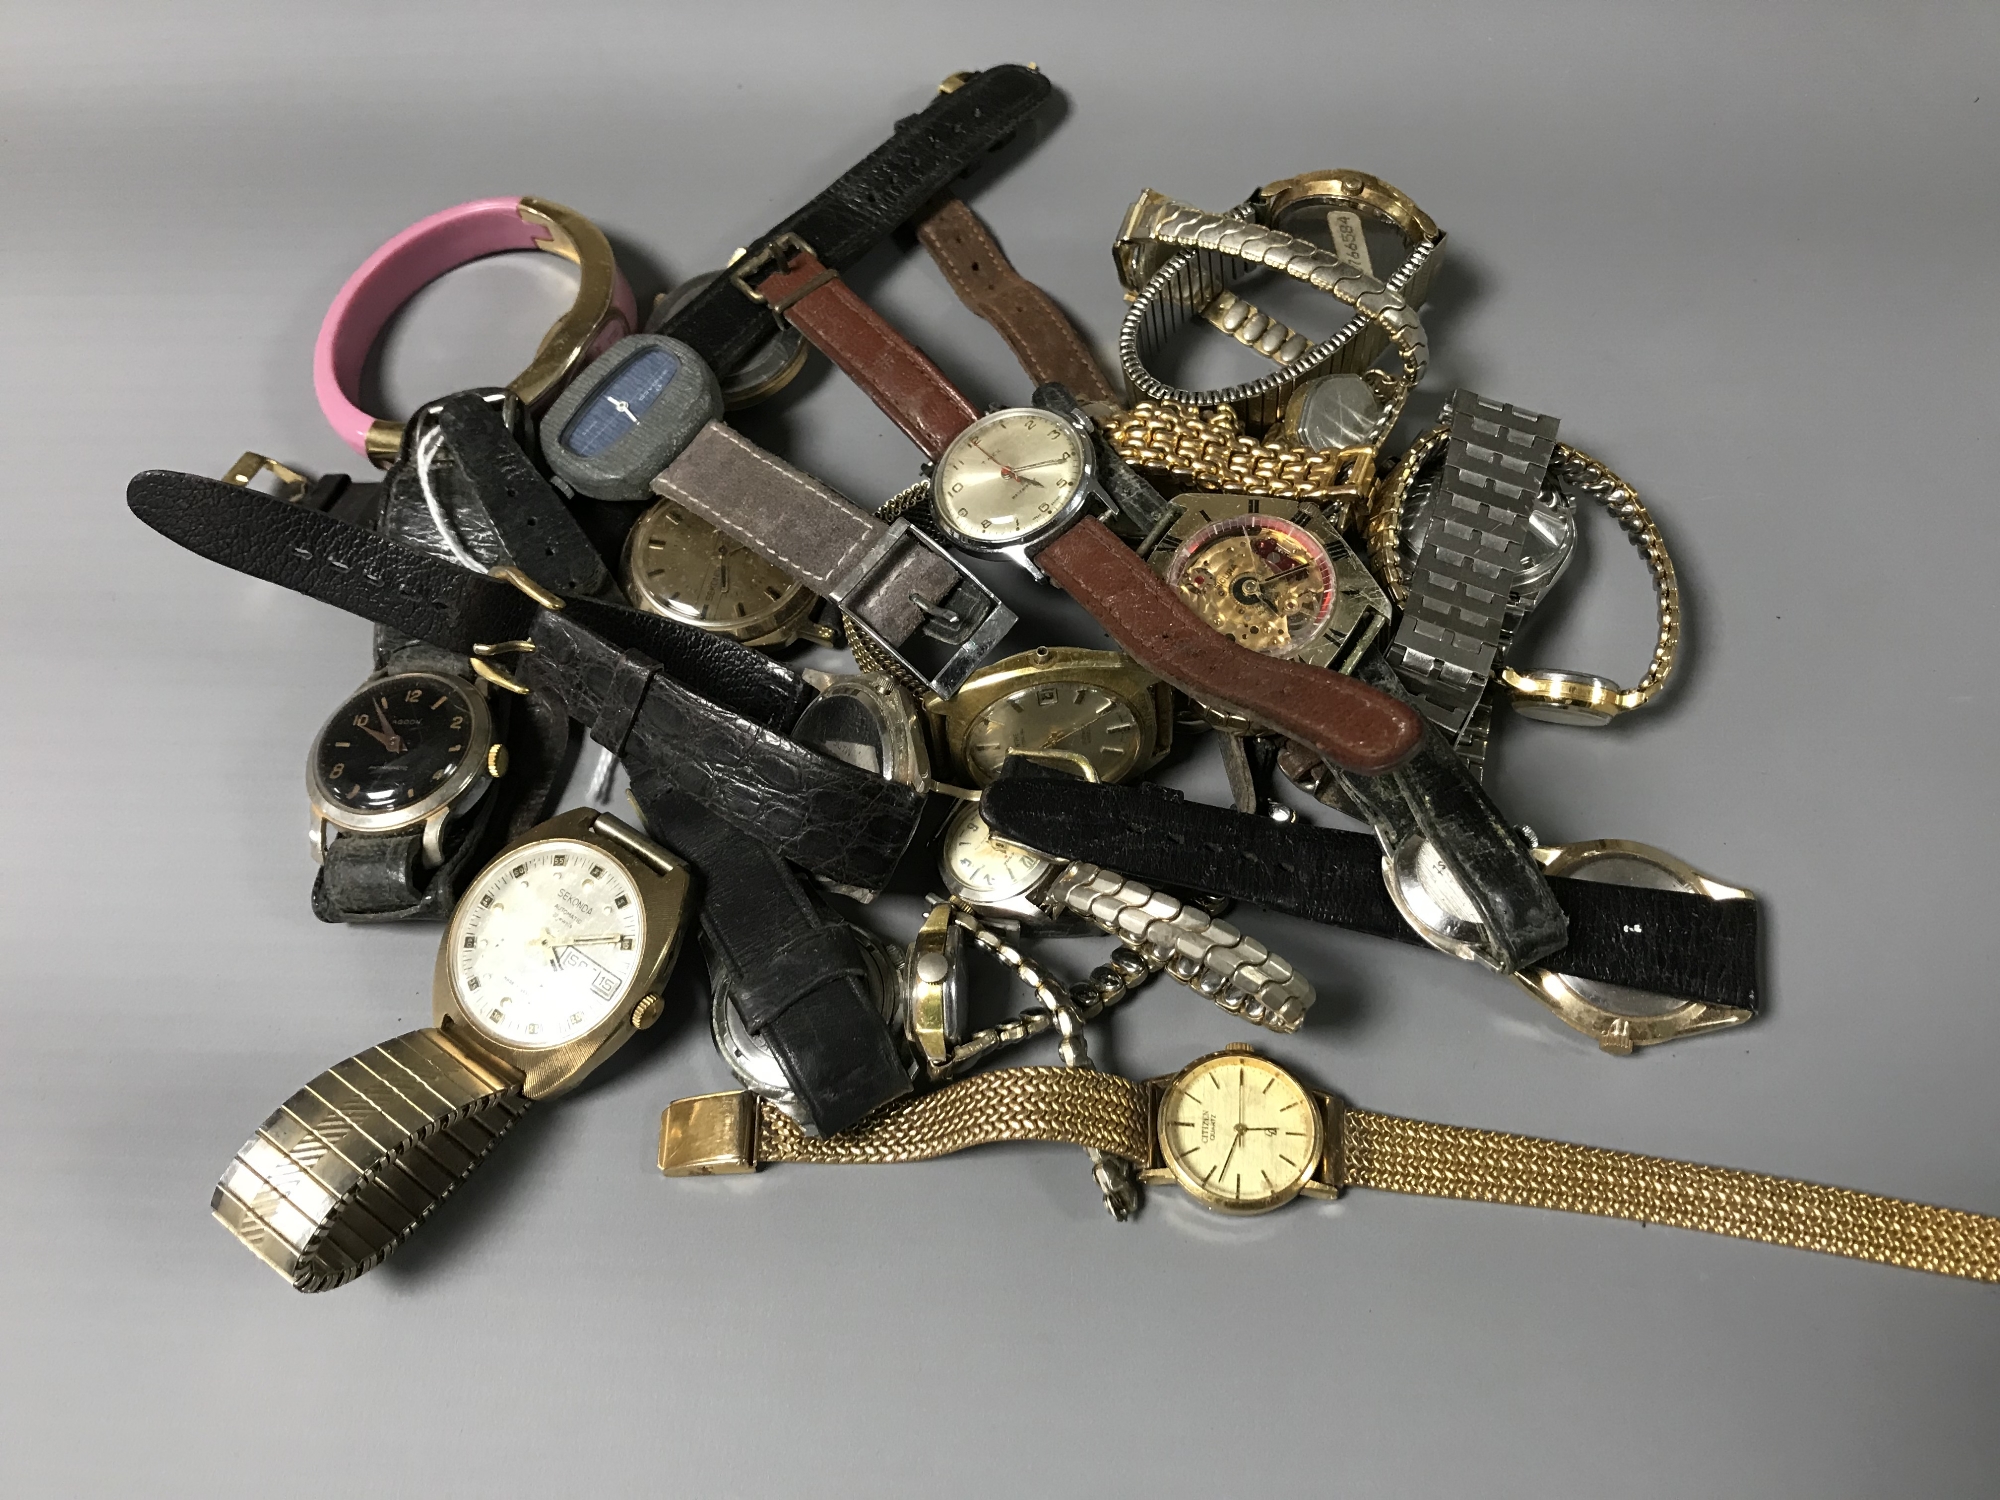 A collection of various wrist watches - Smith's, Montine, Sekonda etc.